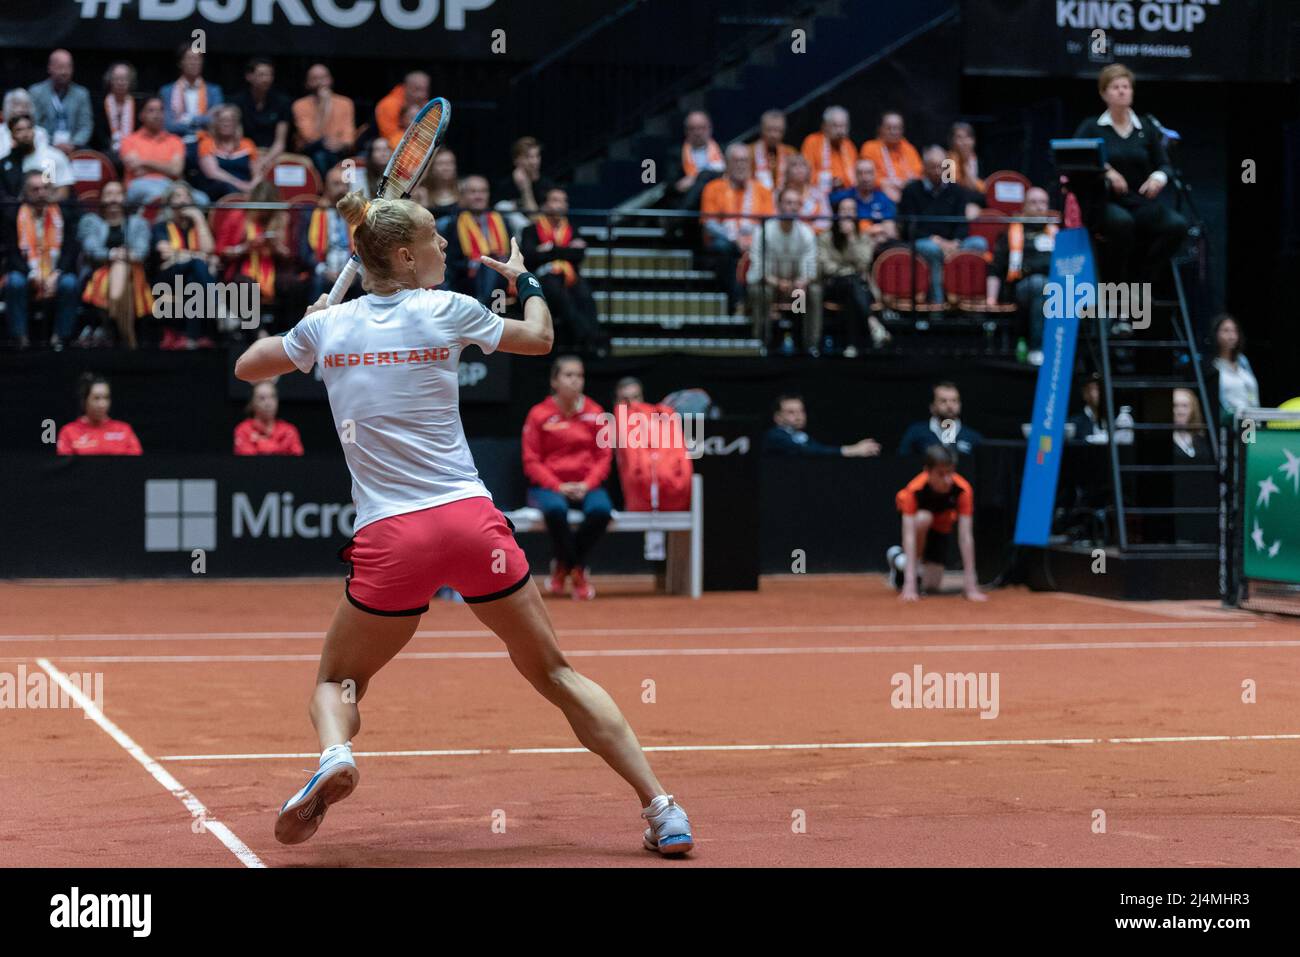 DEN BOSCH, NETHERLANDS - APRIL 16: Arantxa Rus of The Netherlands in her  match against Ara Sorribes Tormo of Spain during the Billie Jean King Cup  at Maaspoort on April 16, 2022